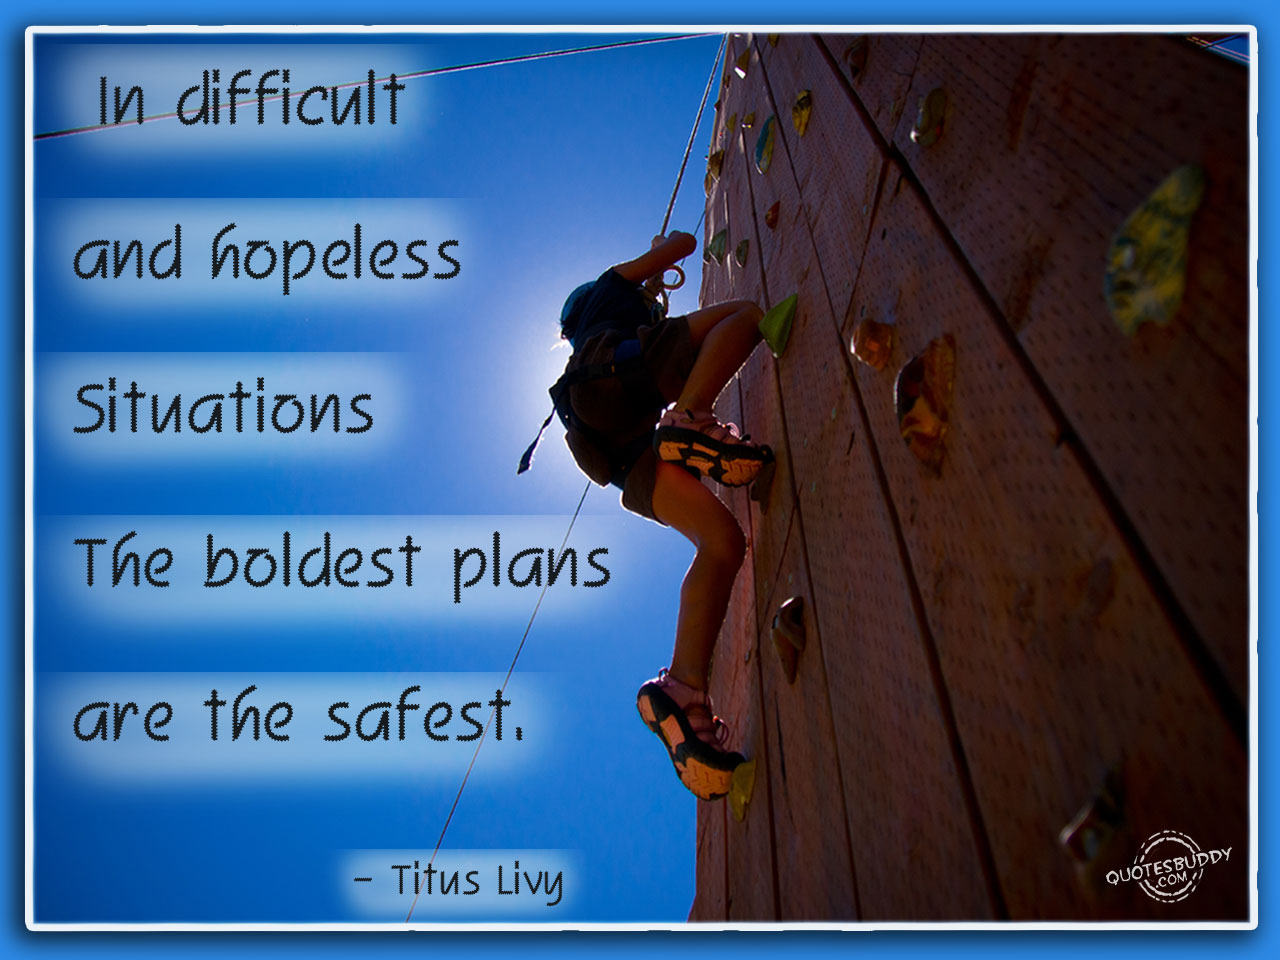 In difficult situations boldest plans are the safest. Titus Livy